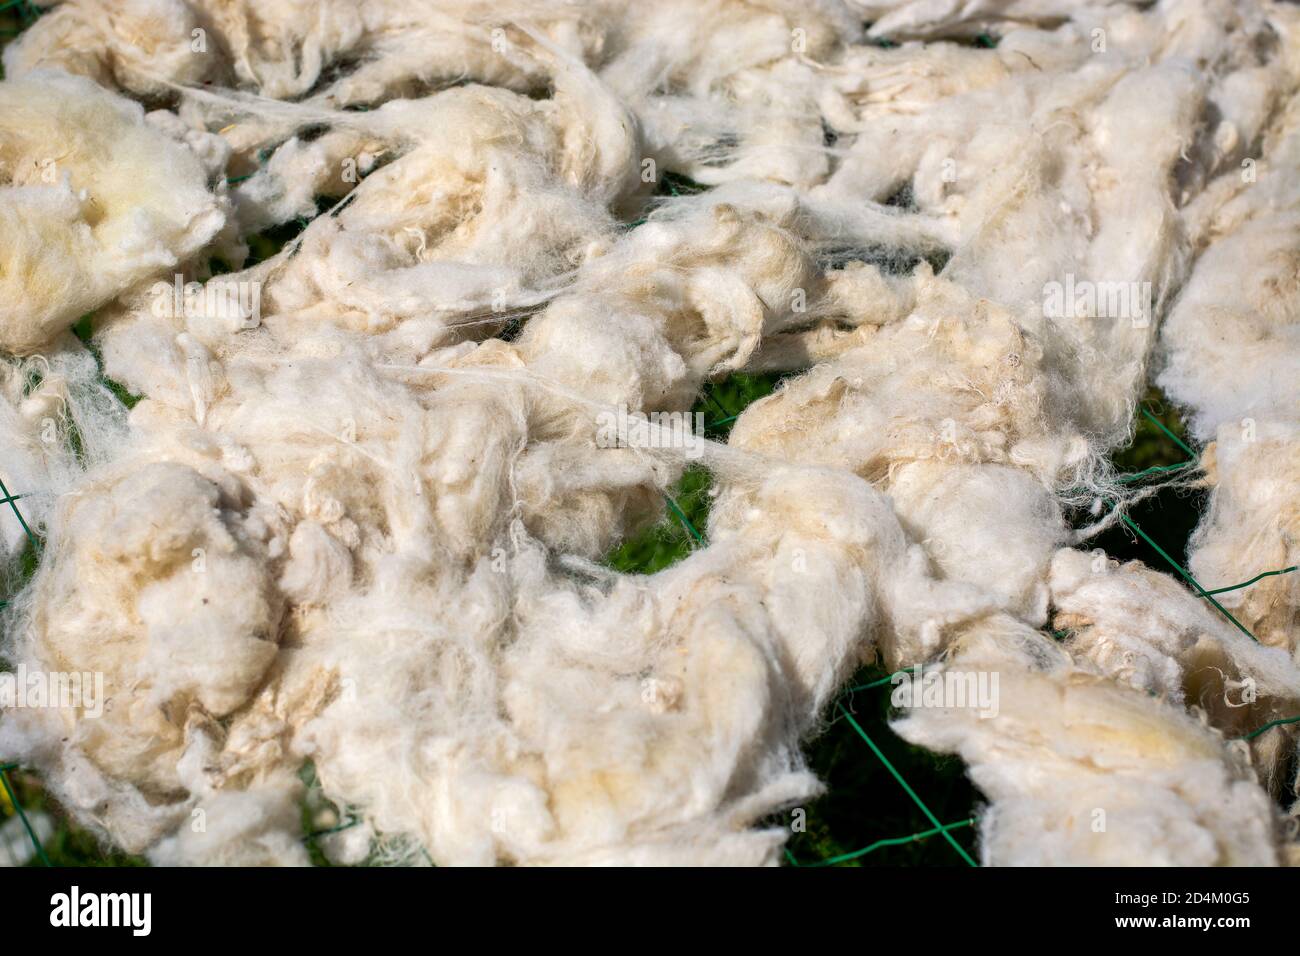 Washed sheep wool drying up in the sun. Sheep's fleece left to dry outside on a fence after being washed. Stock Photo